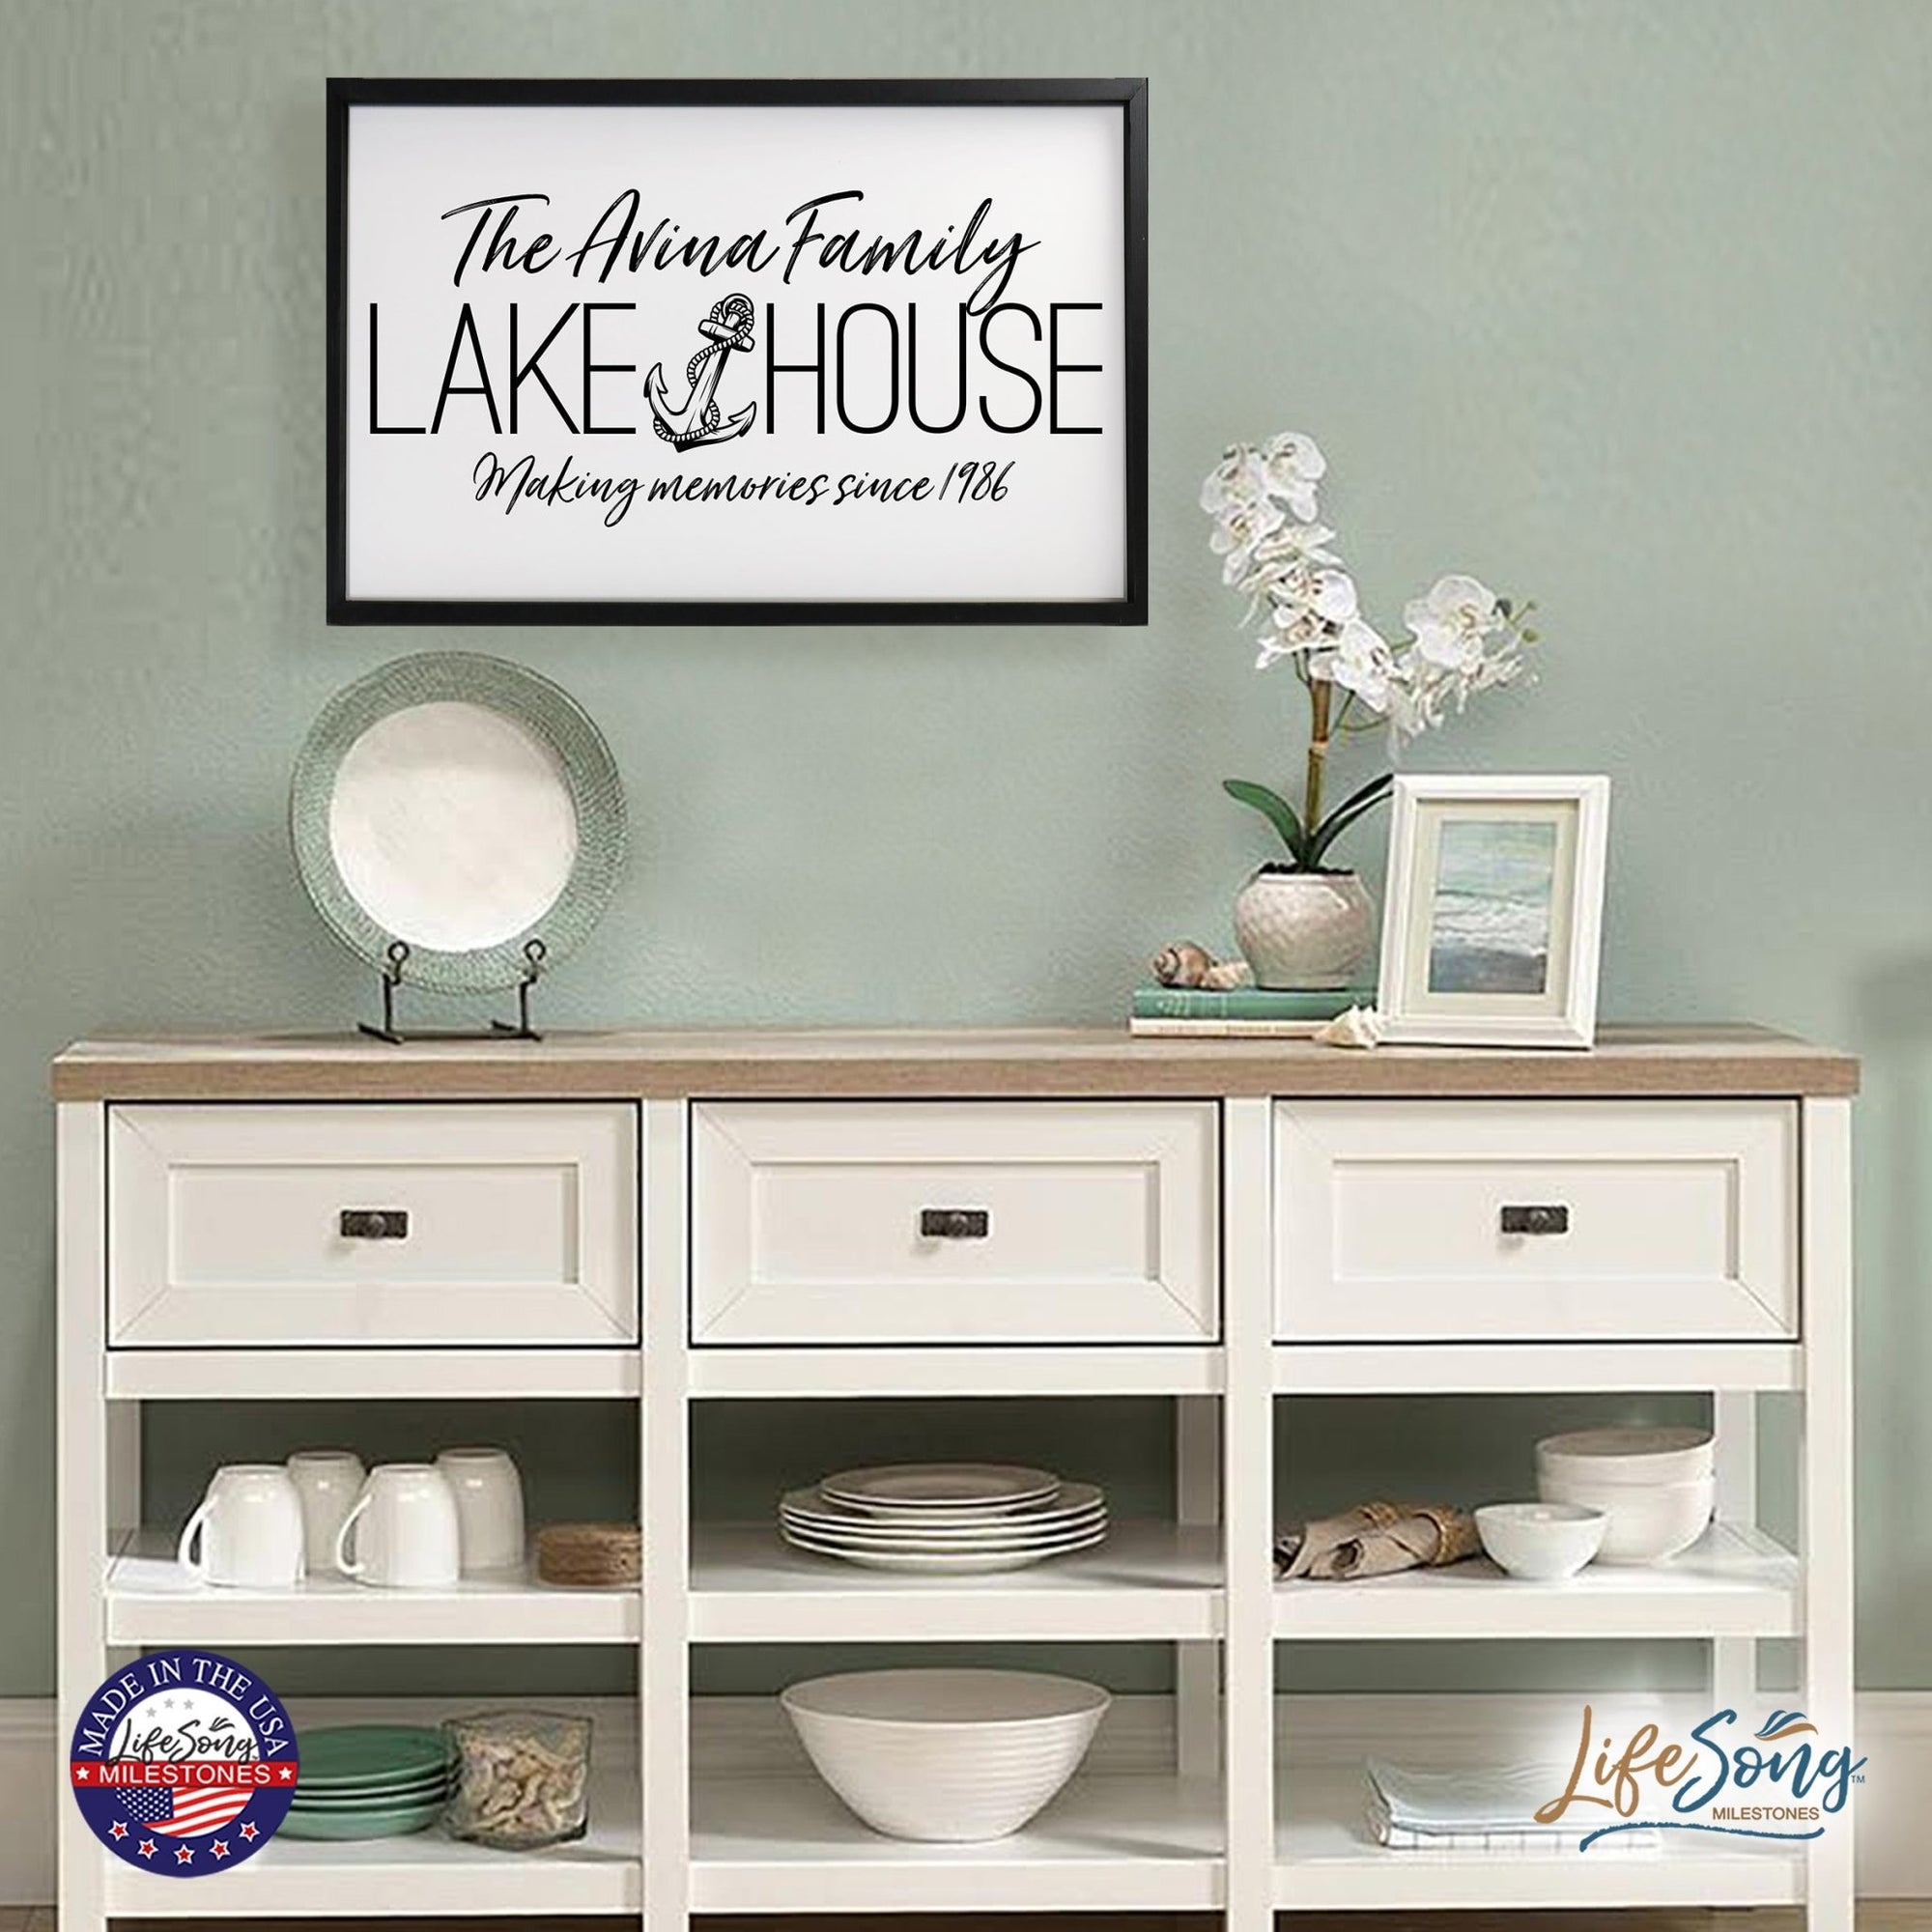 Inspirational Personalized Framed Shadow Box 25x36 - Lake House (Anchor) - LifeSong Milestones